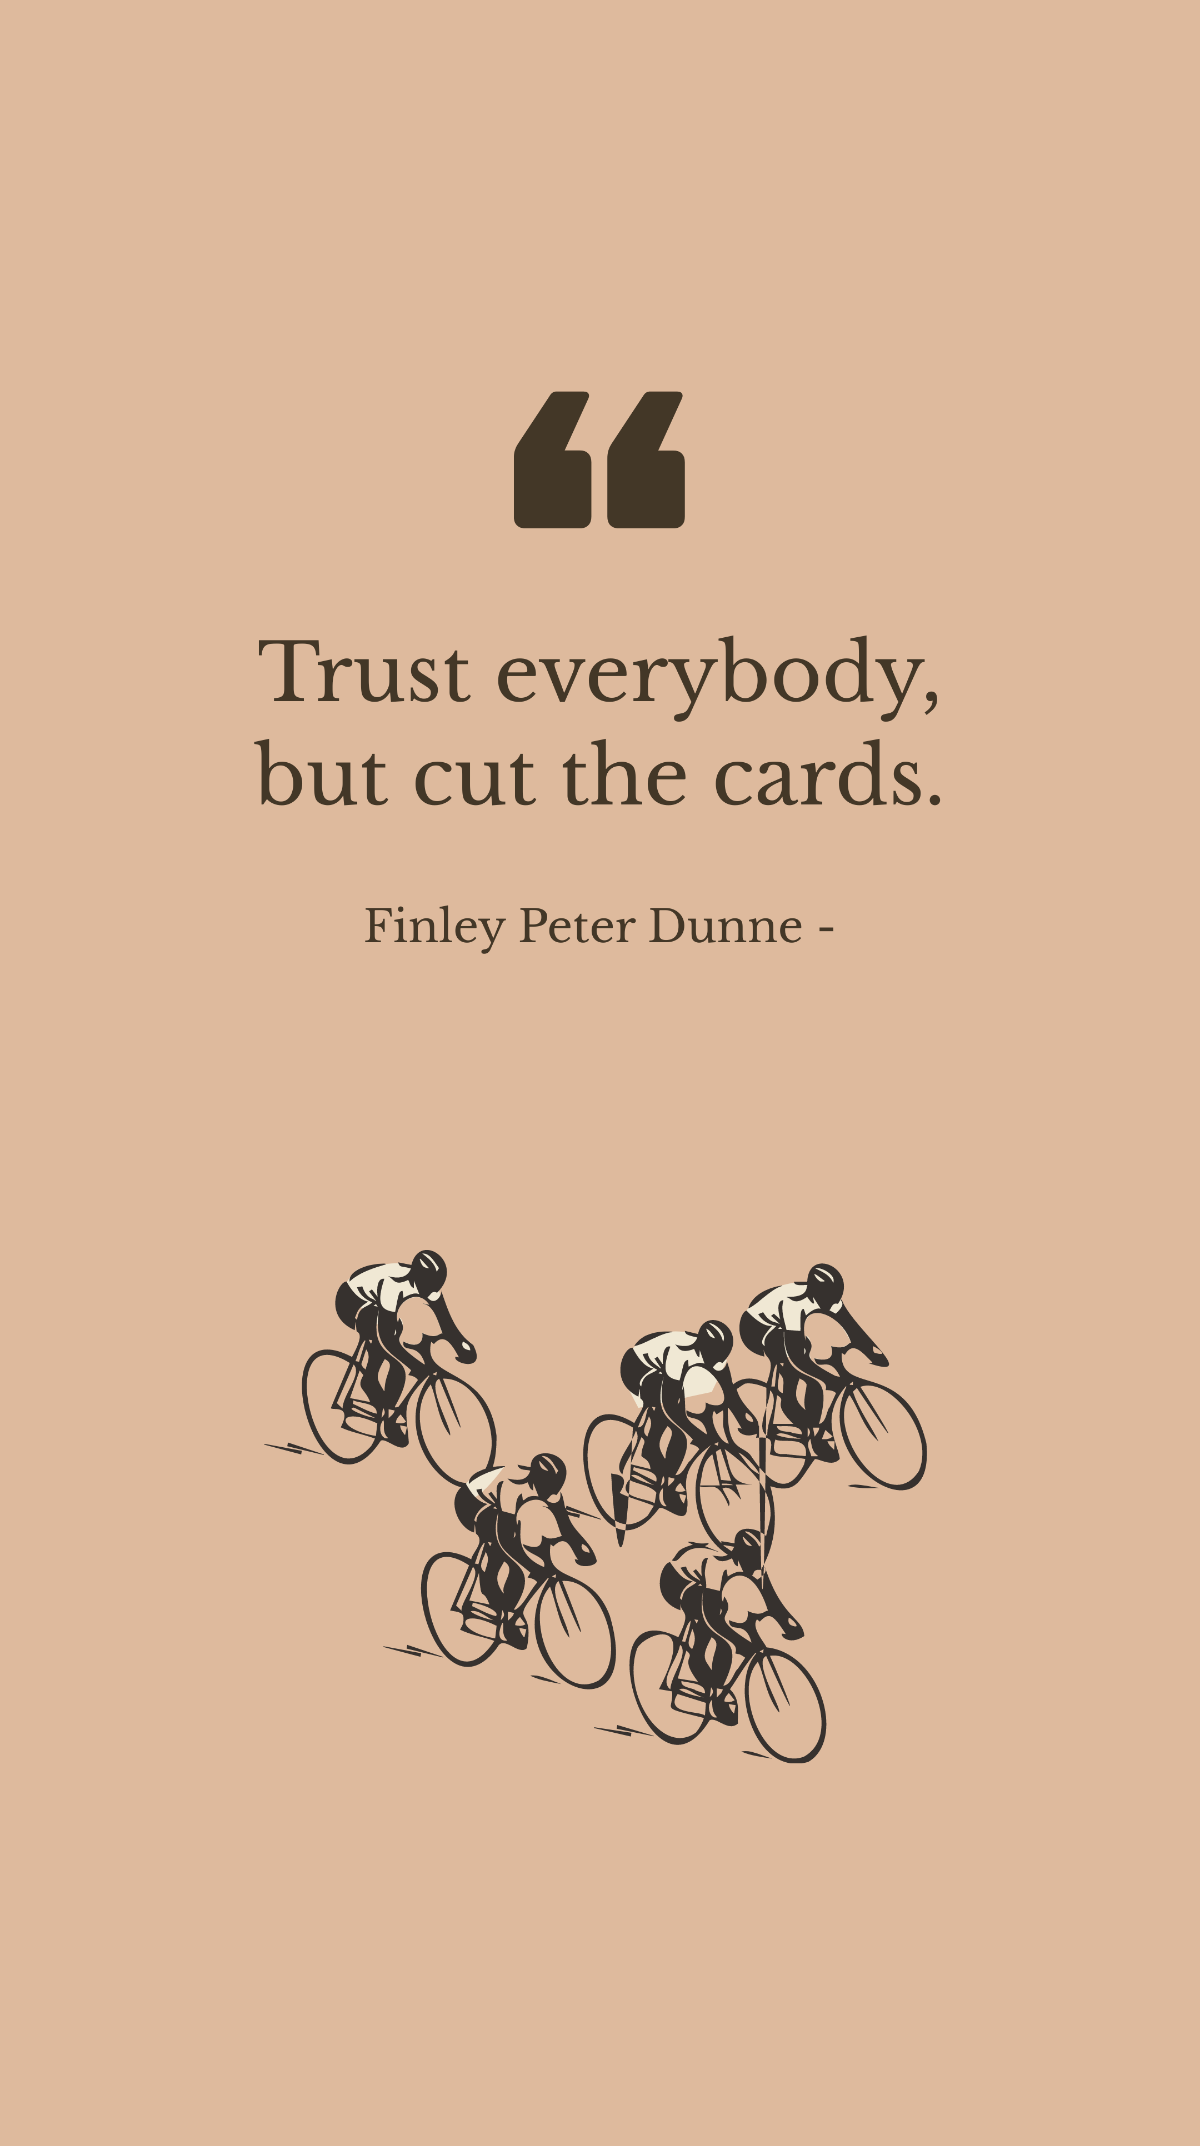 Free Finley Peter Dunne - Trust everybody, but cut the cards. Template